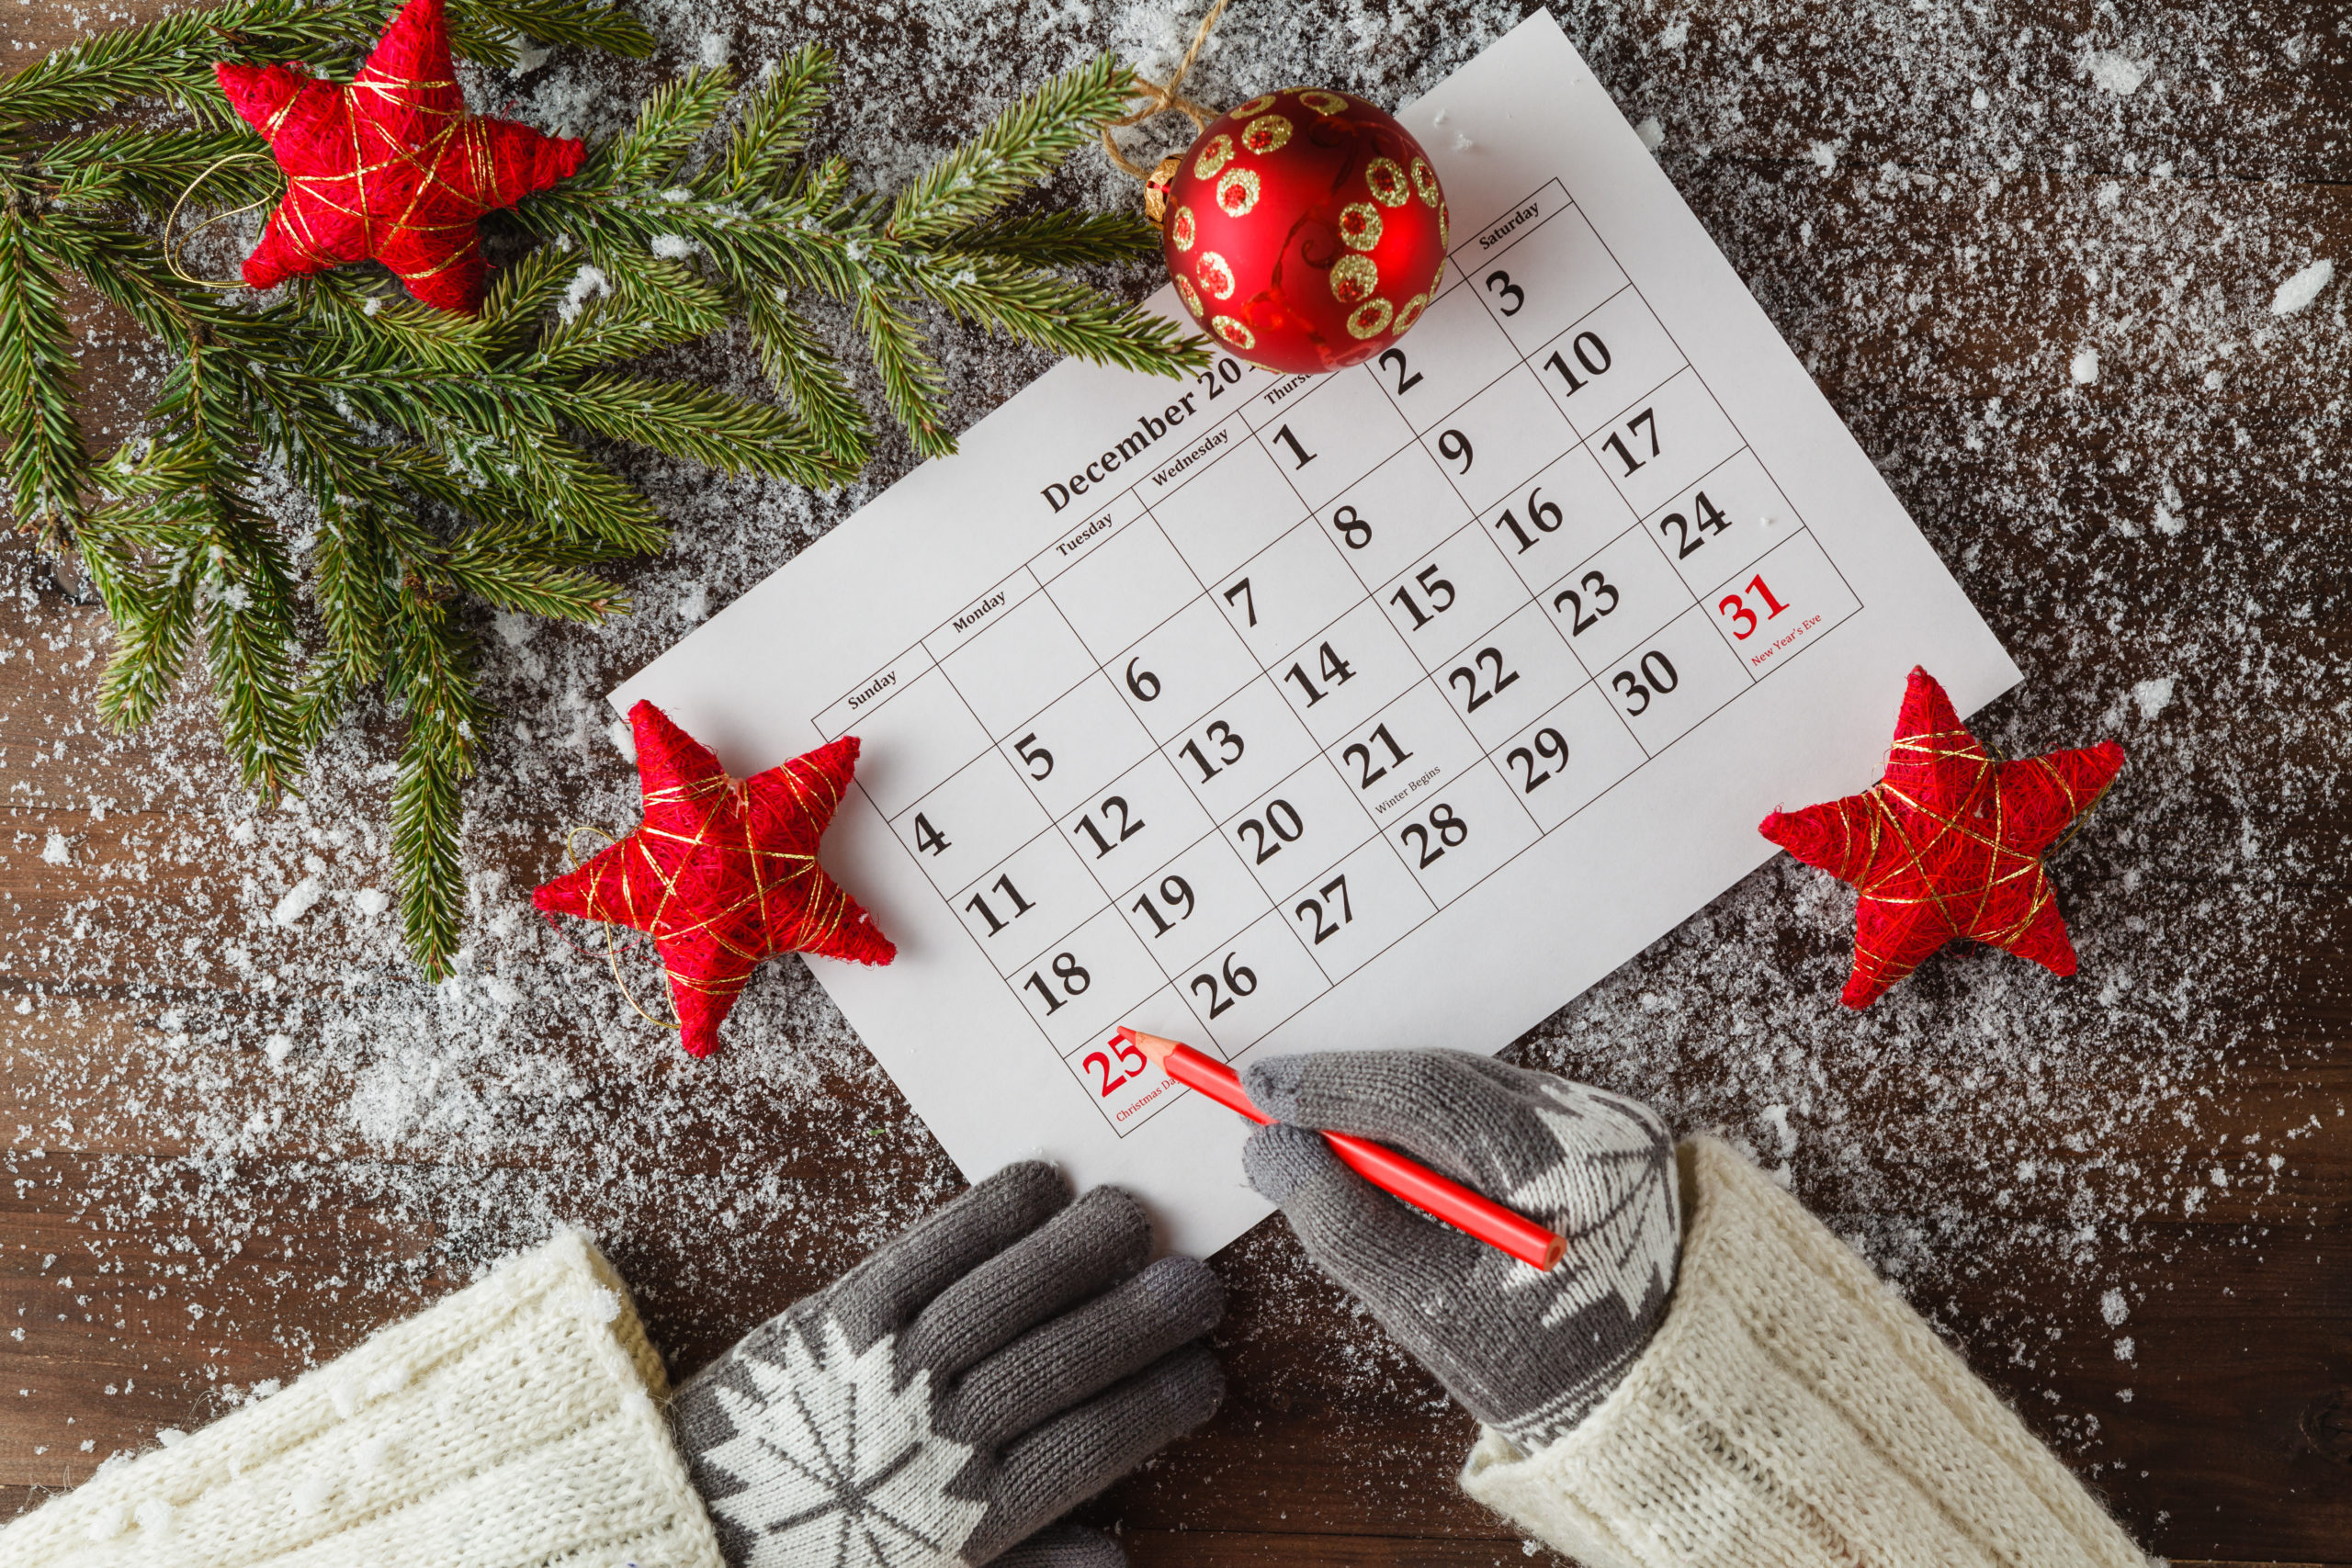 Person wearing snowflake gloves writing on a December calendar surrounded by holiday decorations